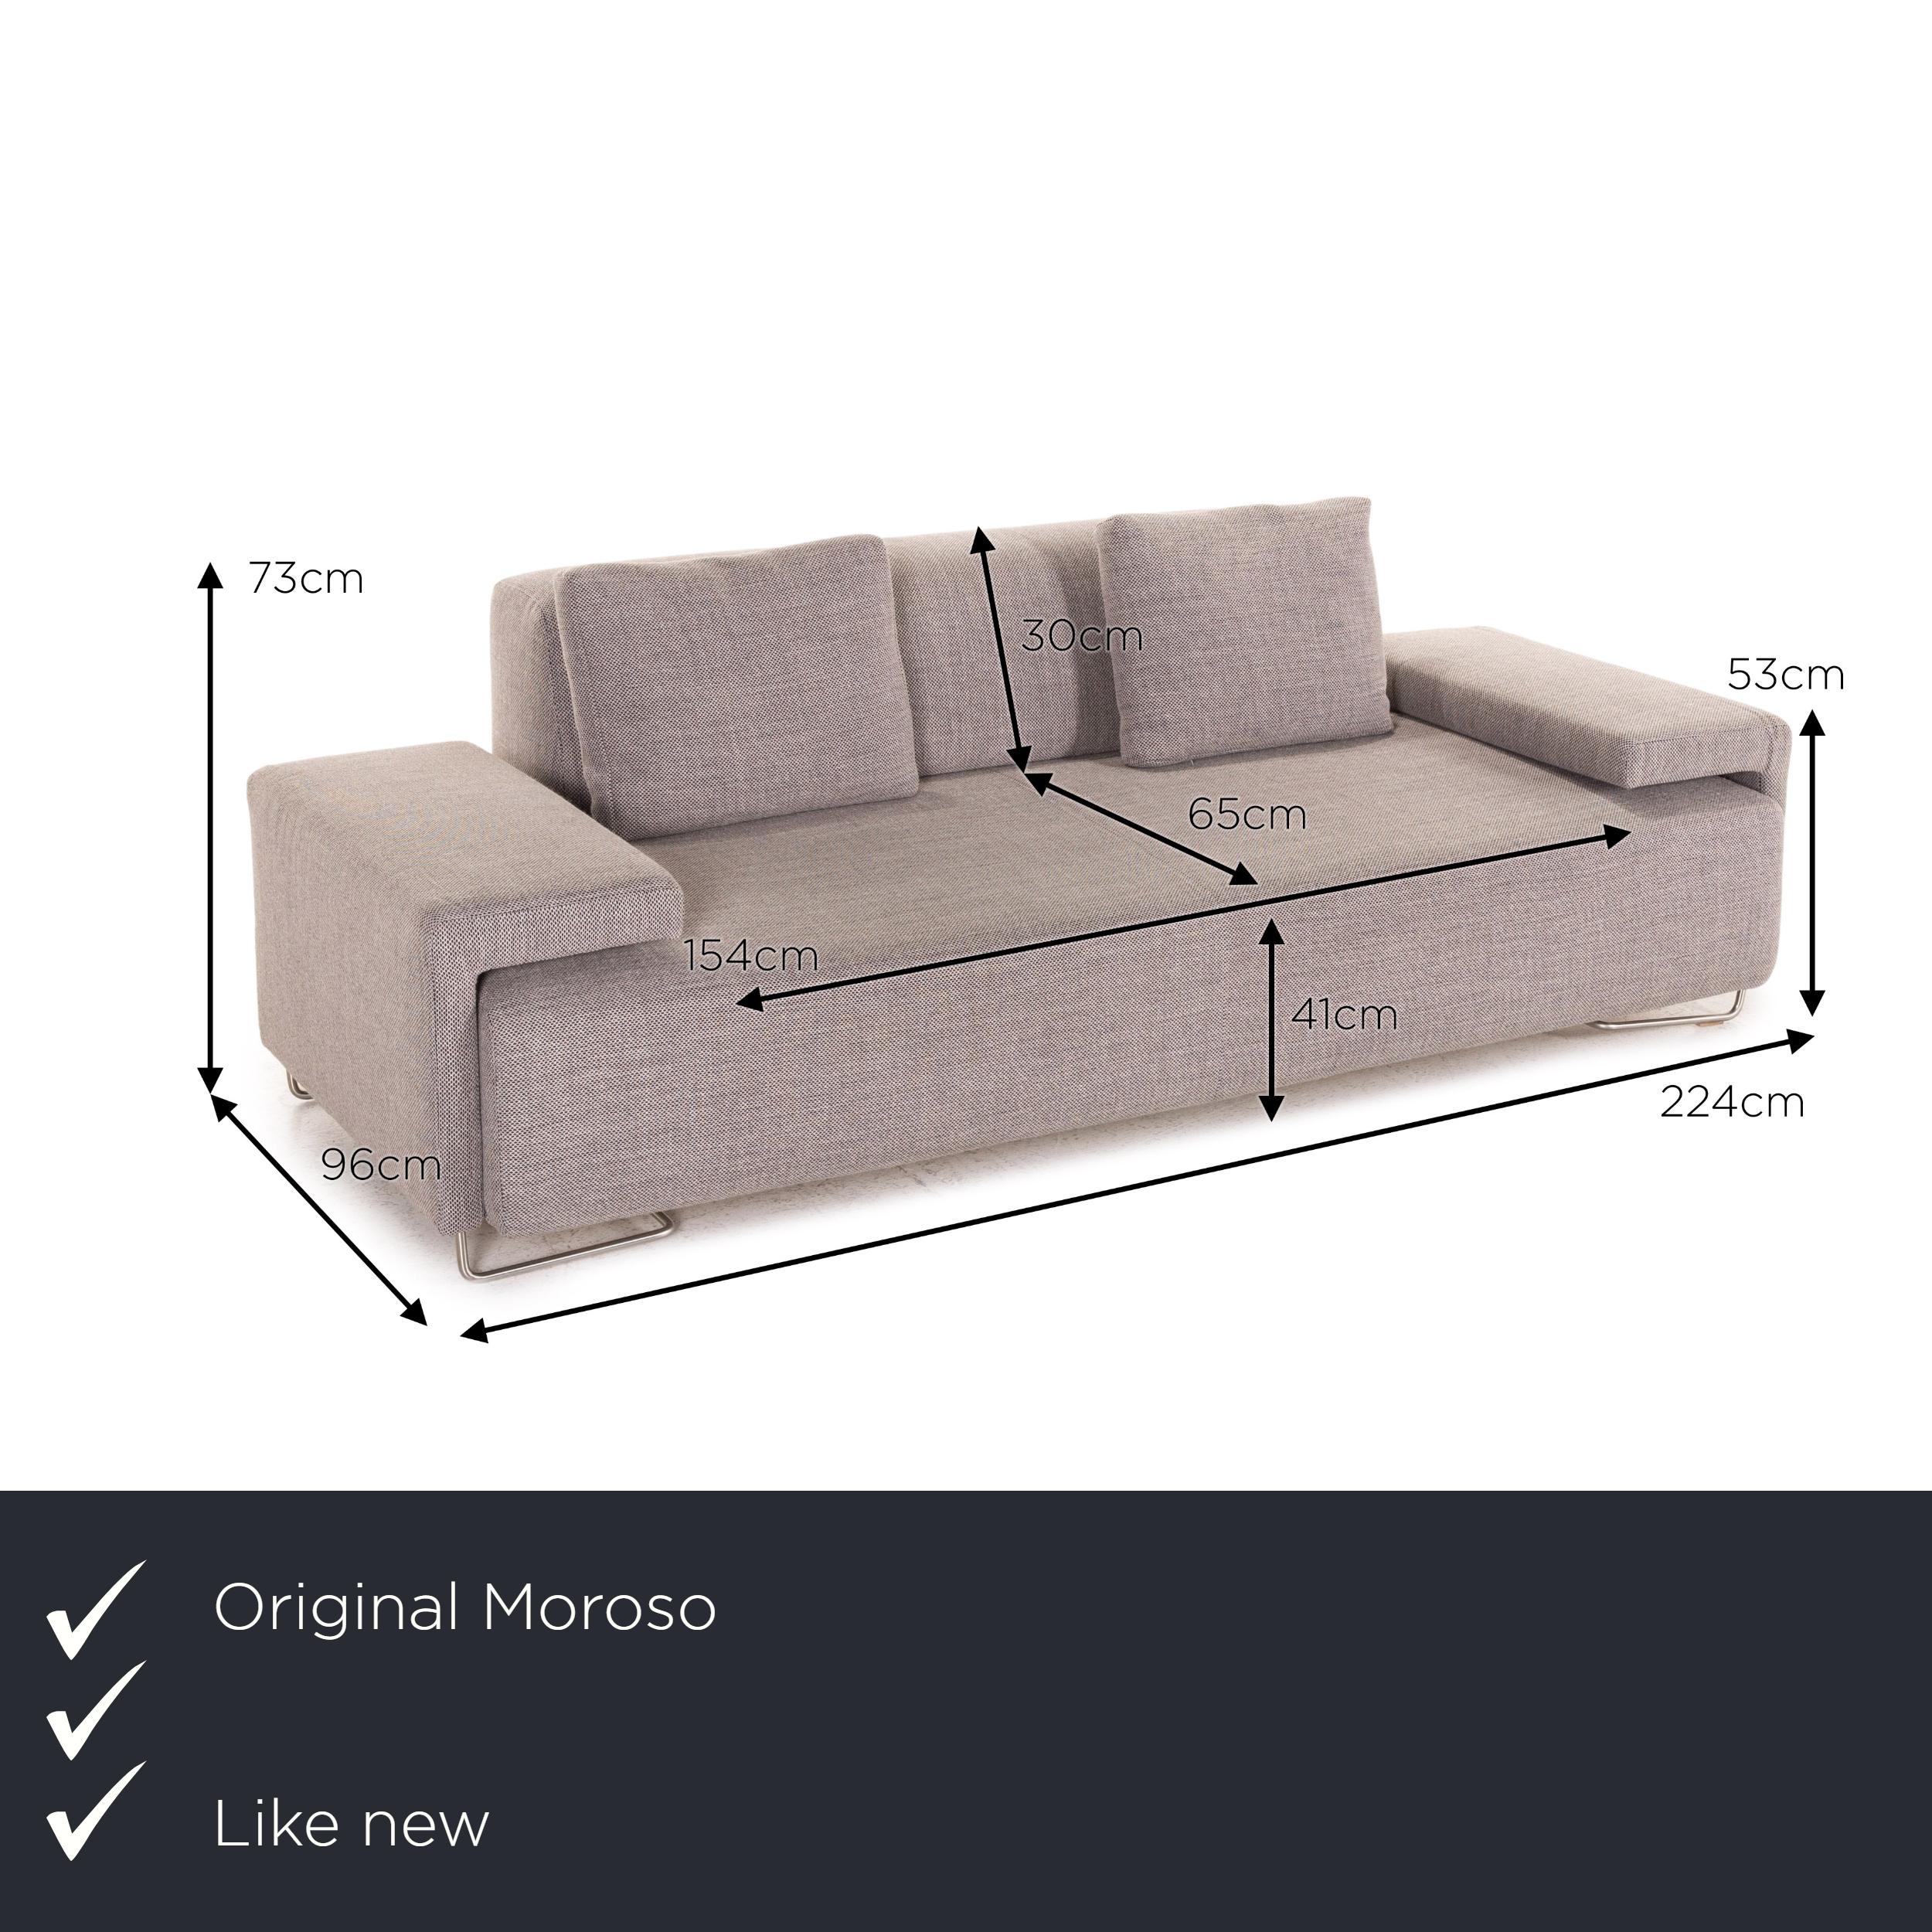 We present to you a Moroso Lowland fabric sofa three seater gray couch.

Product measurements in centimeters:

Depth: 96
Width: 224
Height: 73
Seat height: 41
Rest height: 53
Seat depth: 65
Seat width: 154
Back height: 30.
    